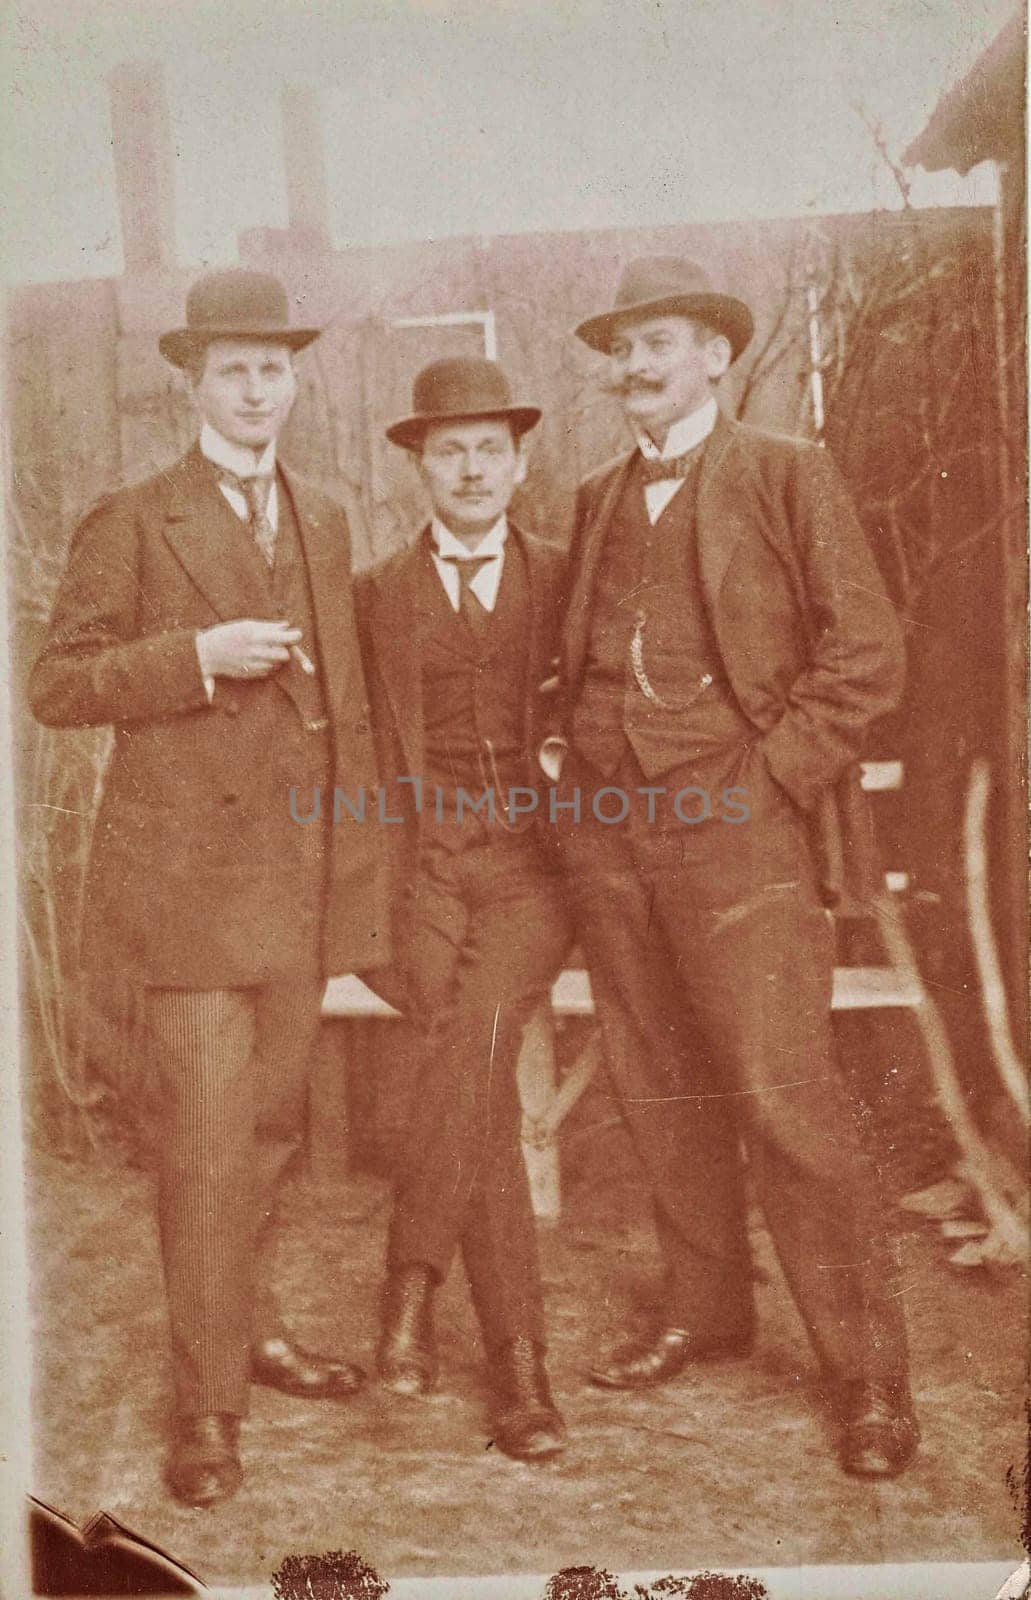 Vintage cabinet card shows dandy men wear bowler hats, luxury garment and one holds cigar. Antique black and white photo. Original photo with imperfection. by roman_nerud